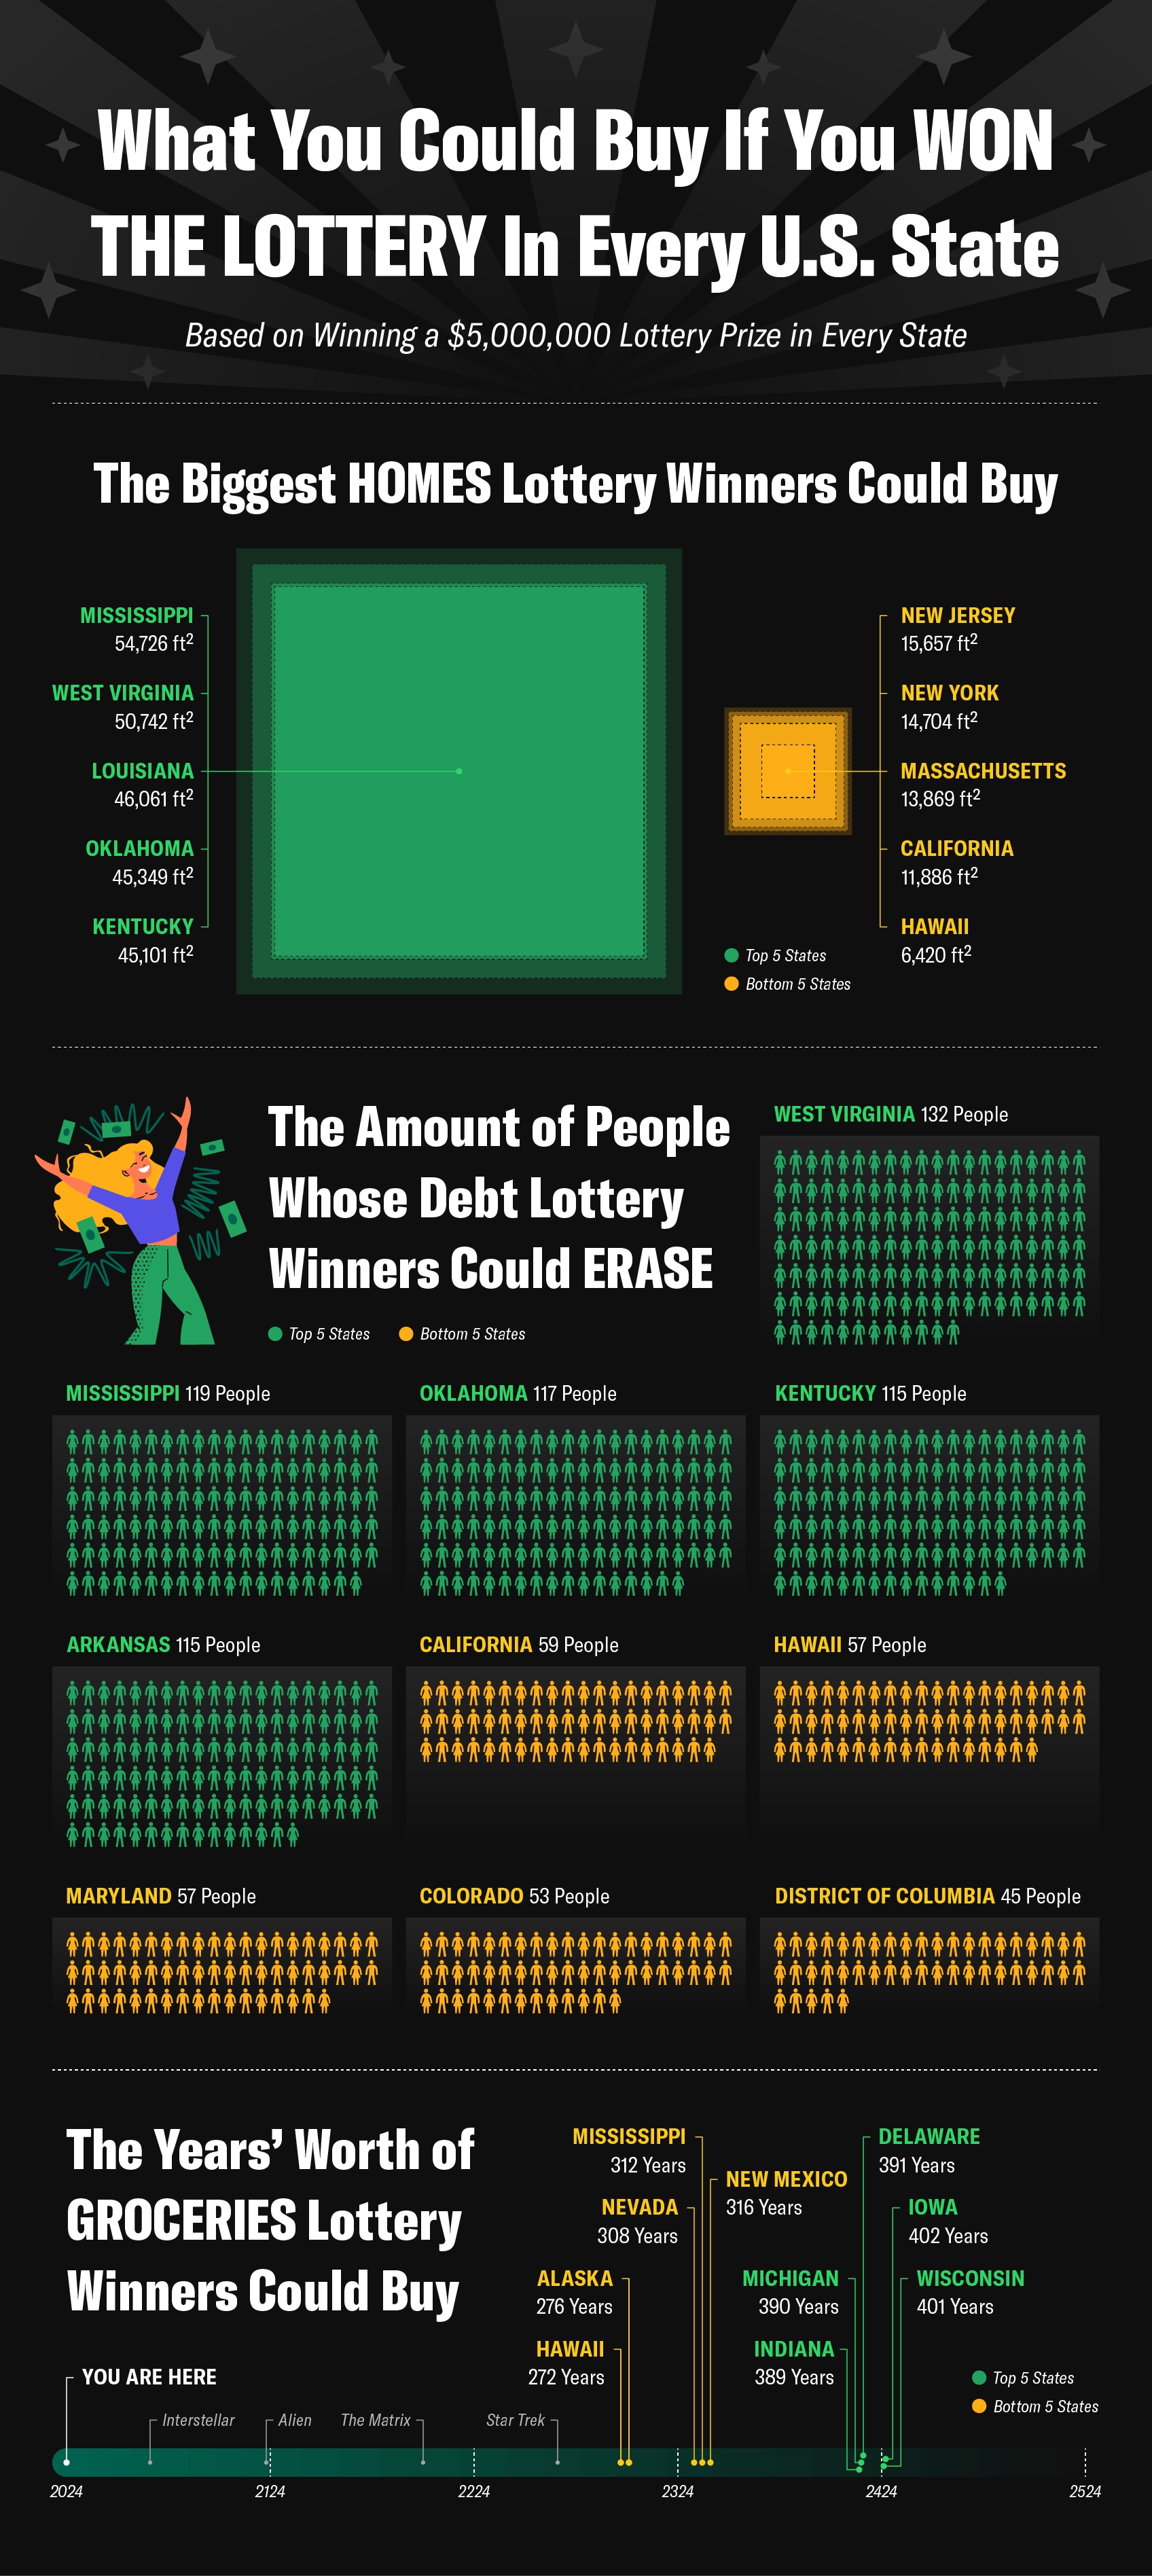 A-mobile-Infographic-visualizing-different-major-purchases-lottery-winners-could-make-with-their-winnings-in-every-state